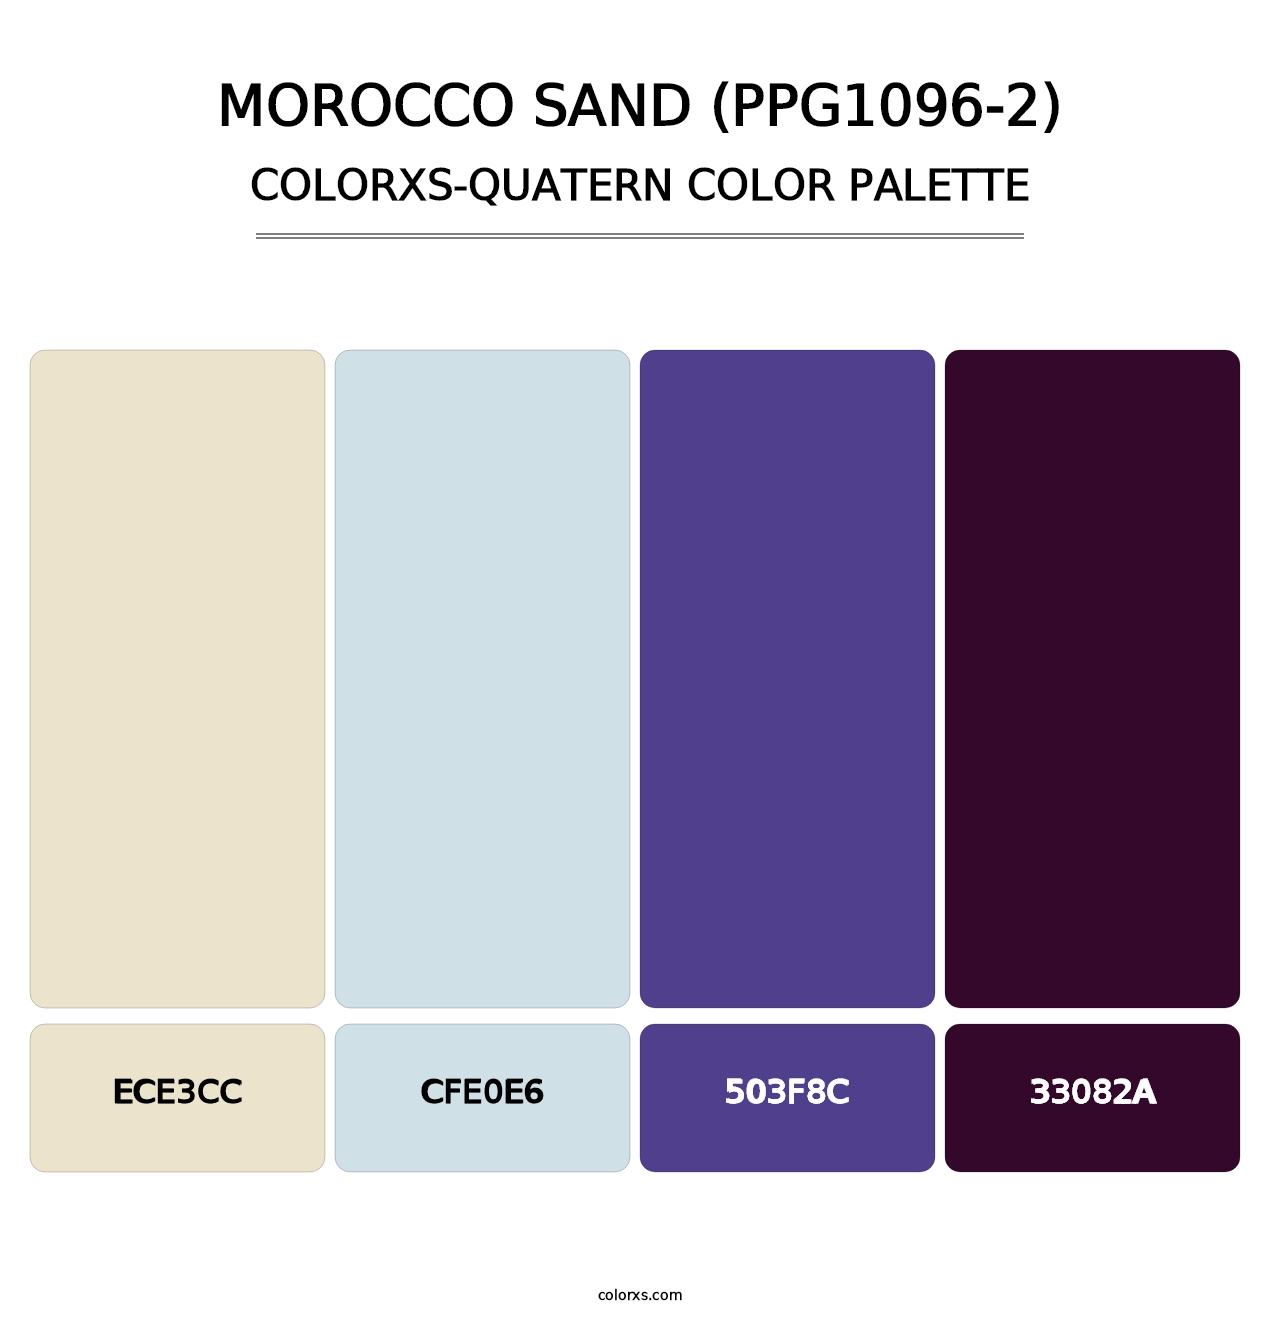 Morocco Sand (PPG1096-2) - Colorxs Quatern Palette